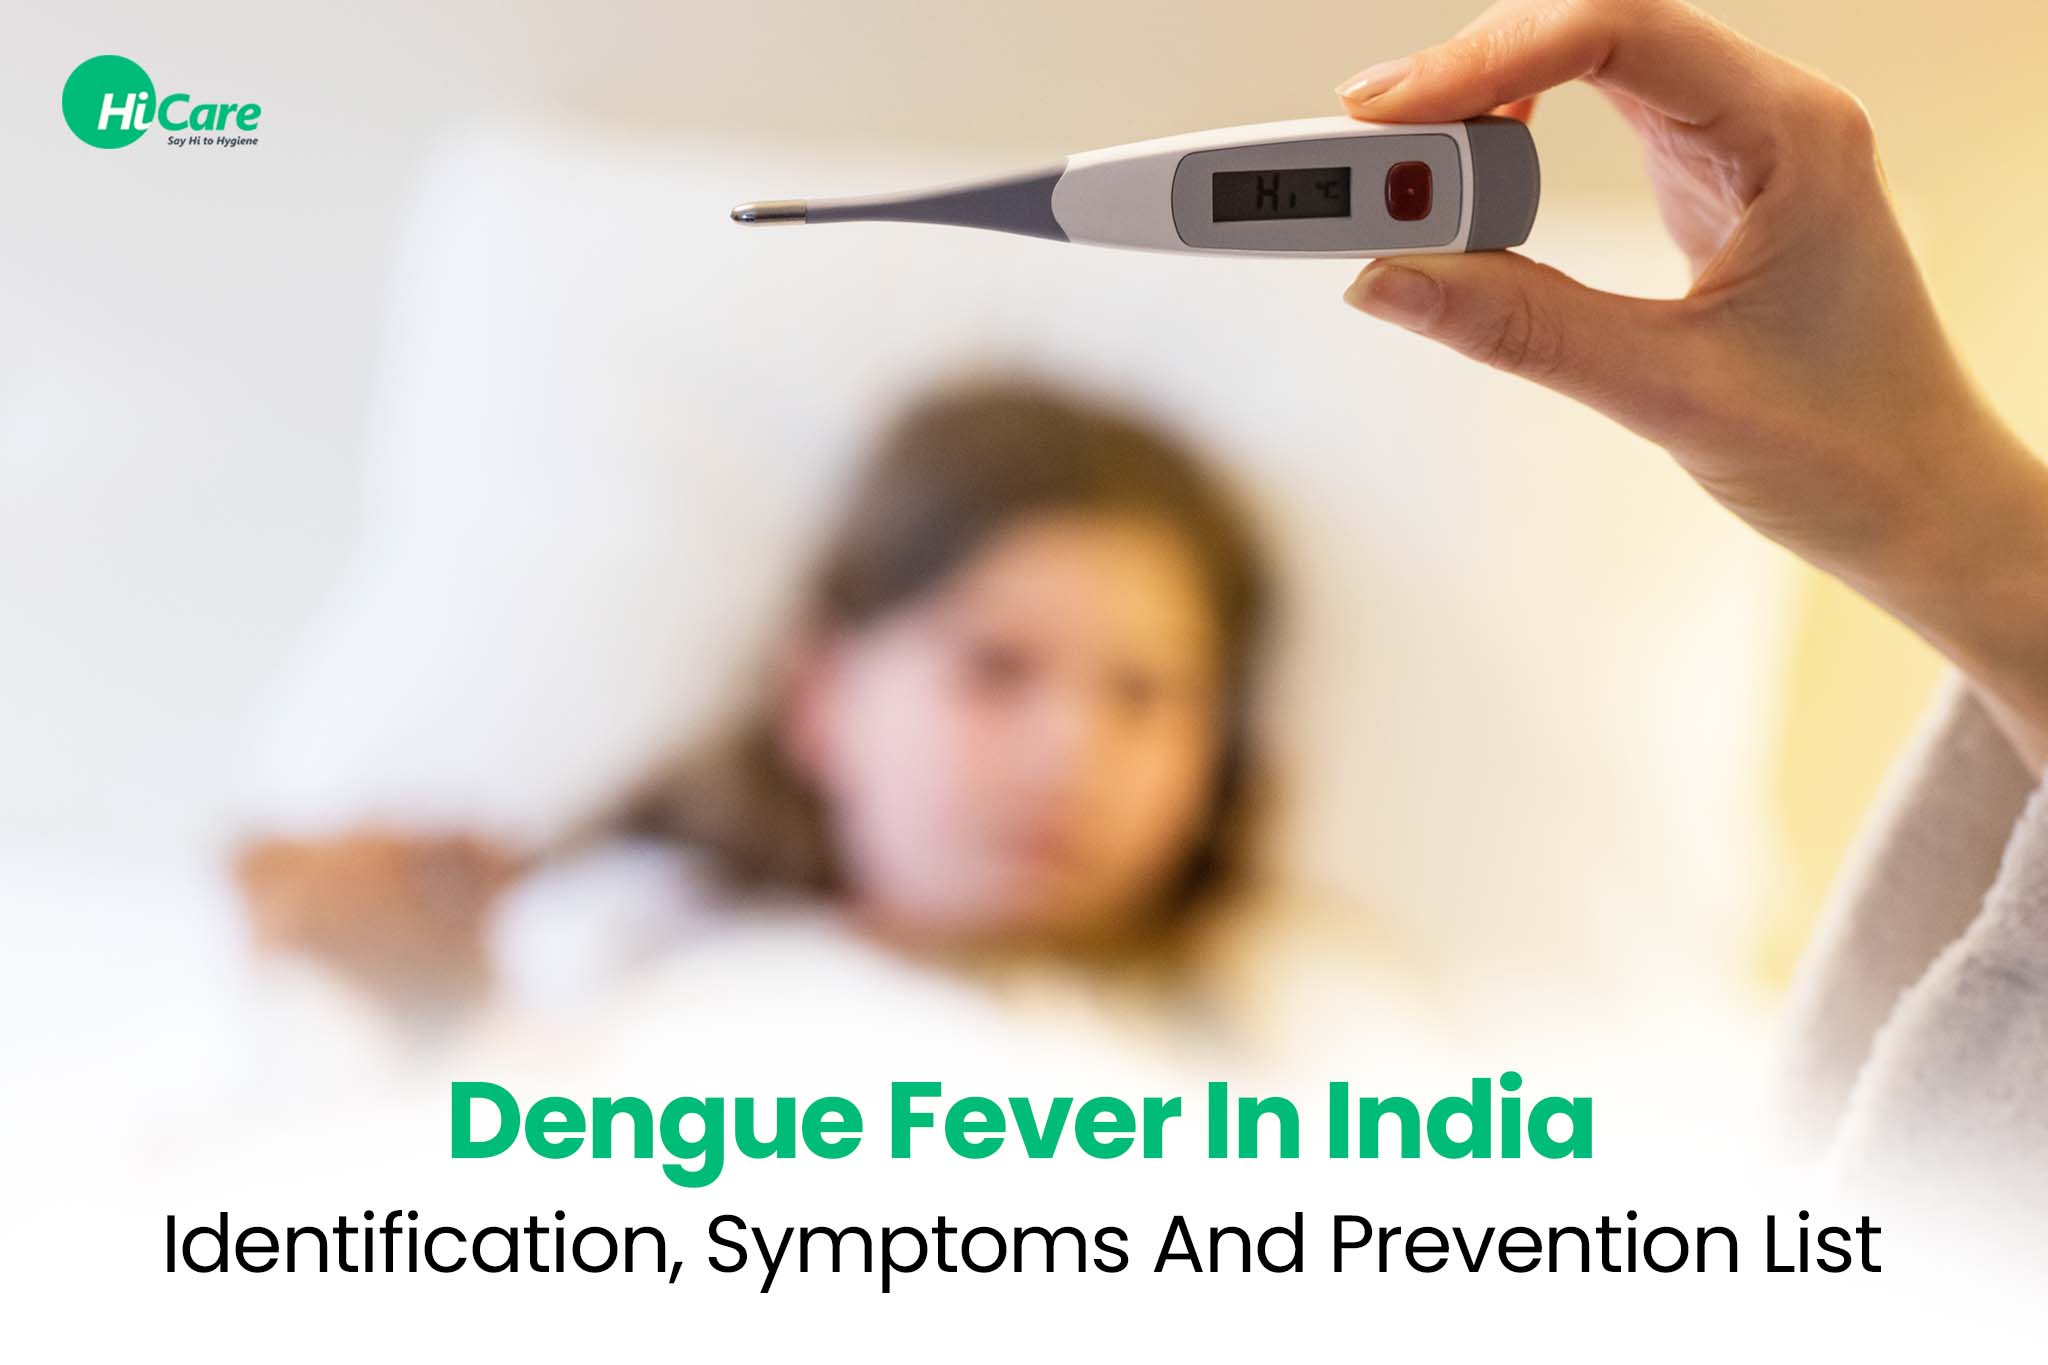 Dengue Fever In India: Identification, Symptoms And Prevention List